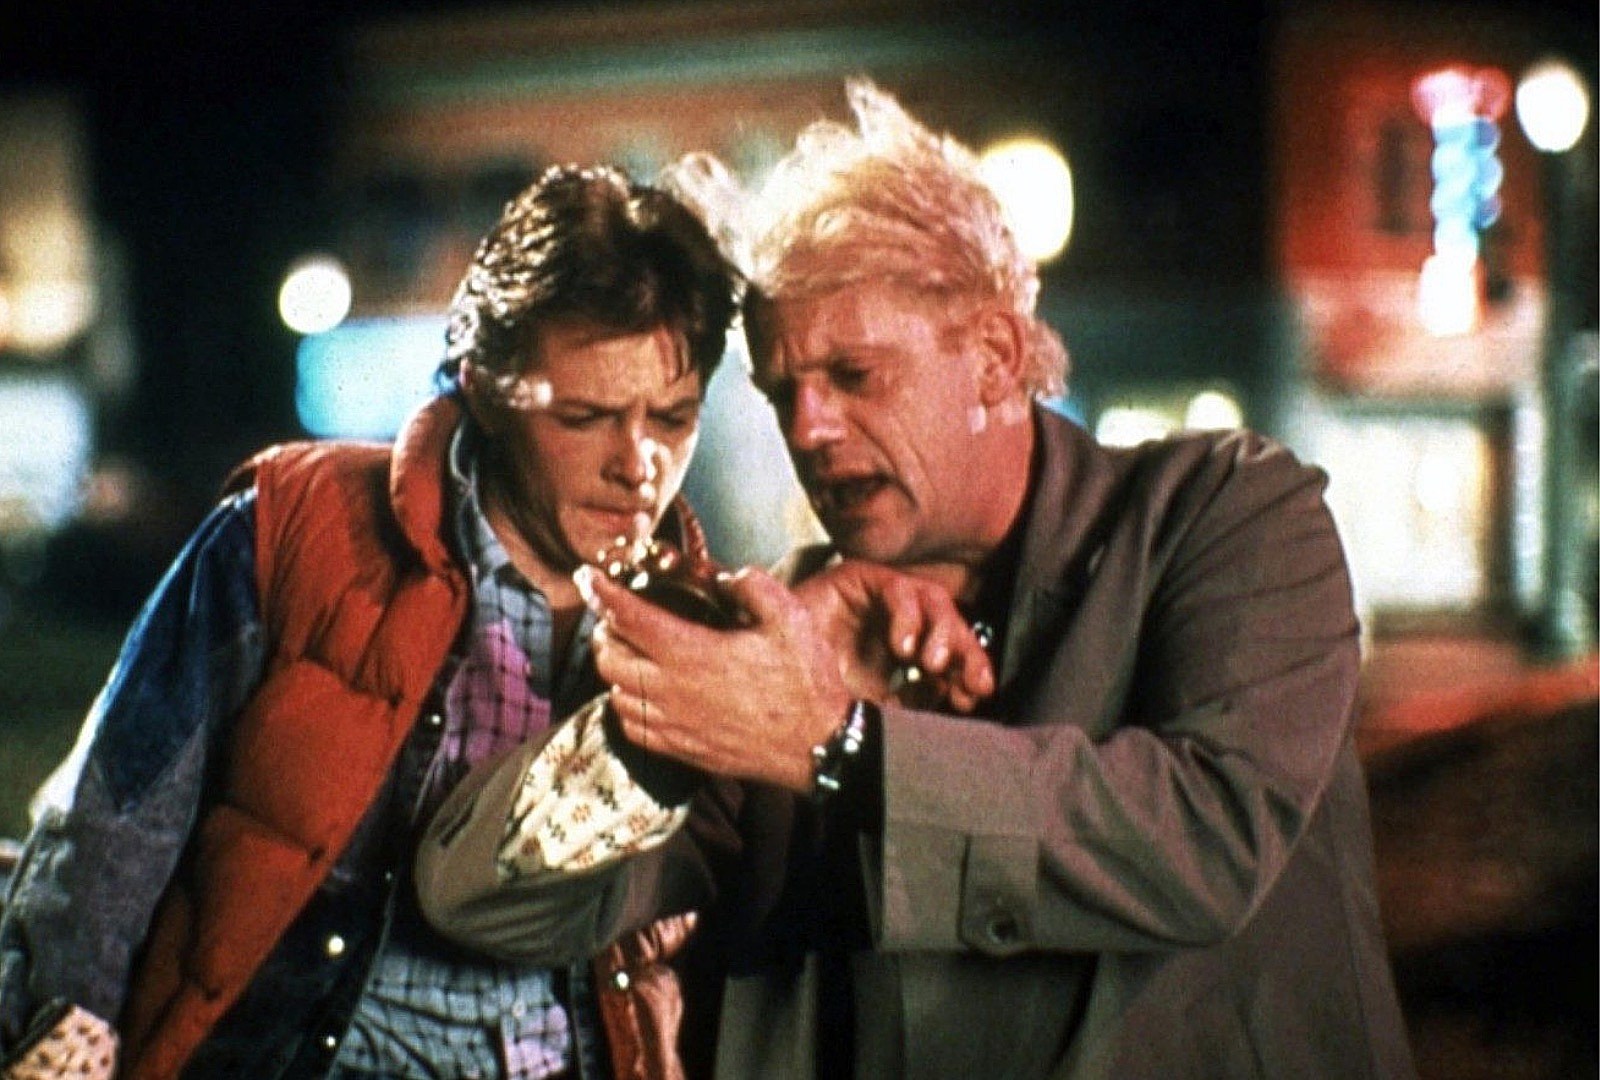 Michael J. Fox, 'Back to the Future' co-stars share touching reunion